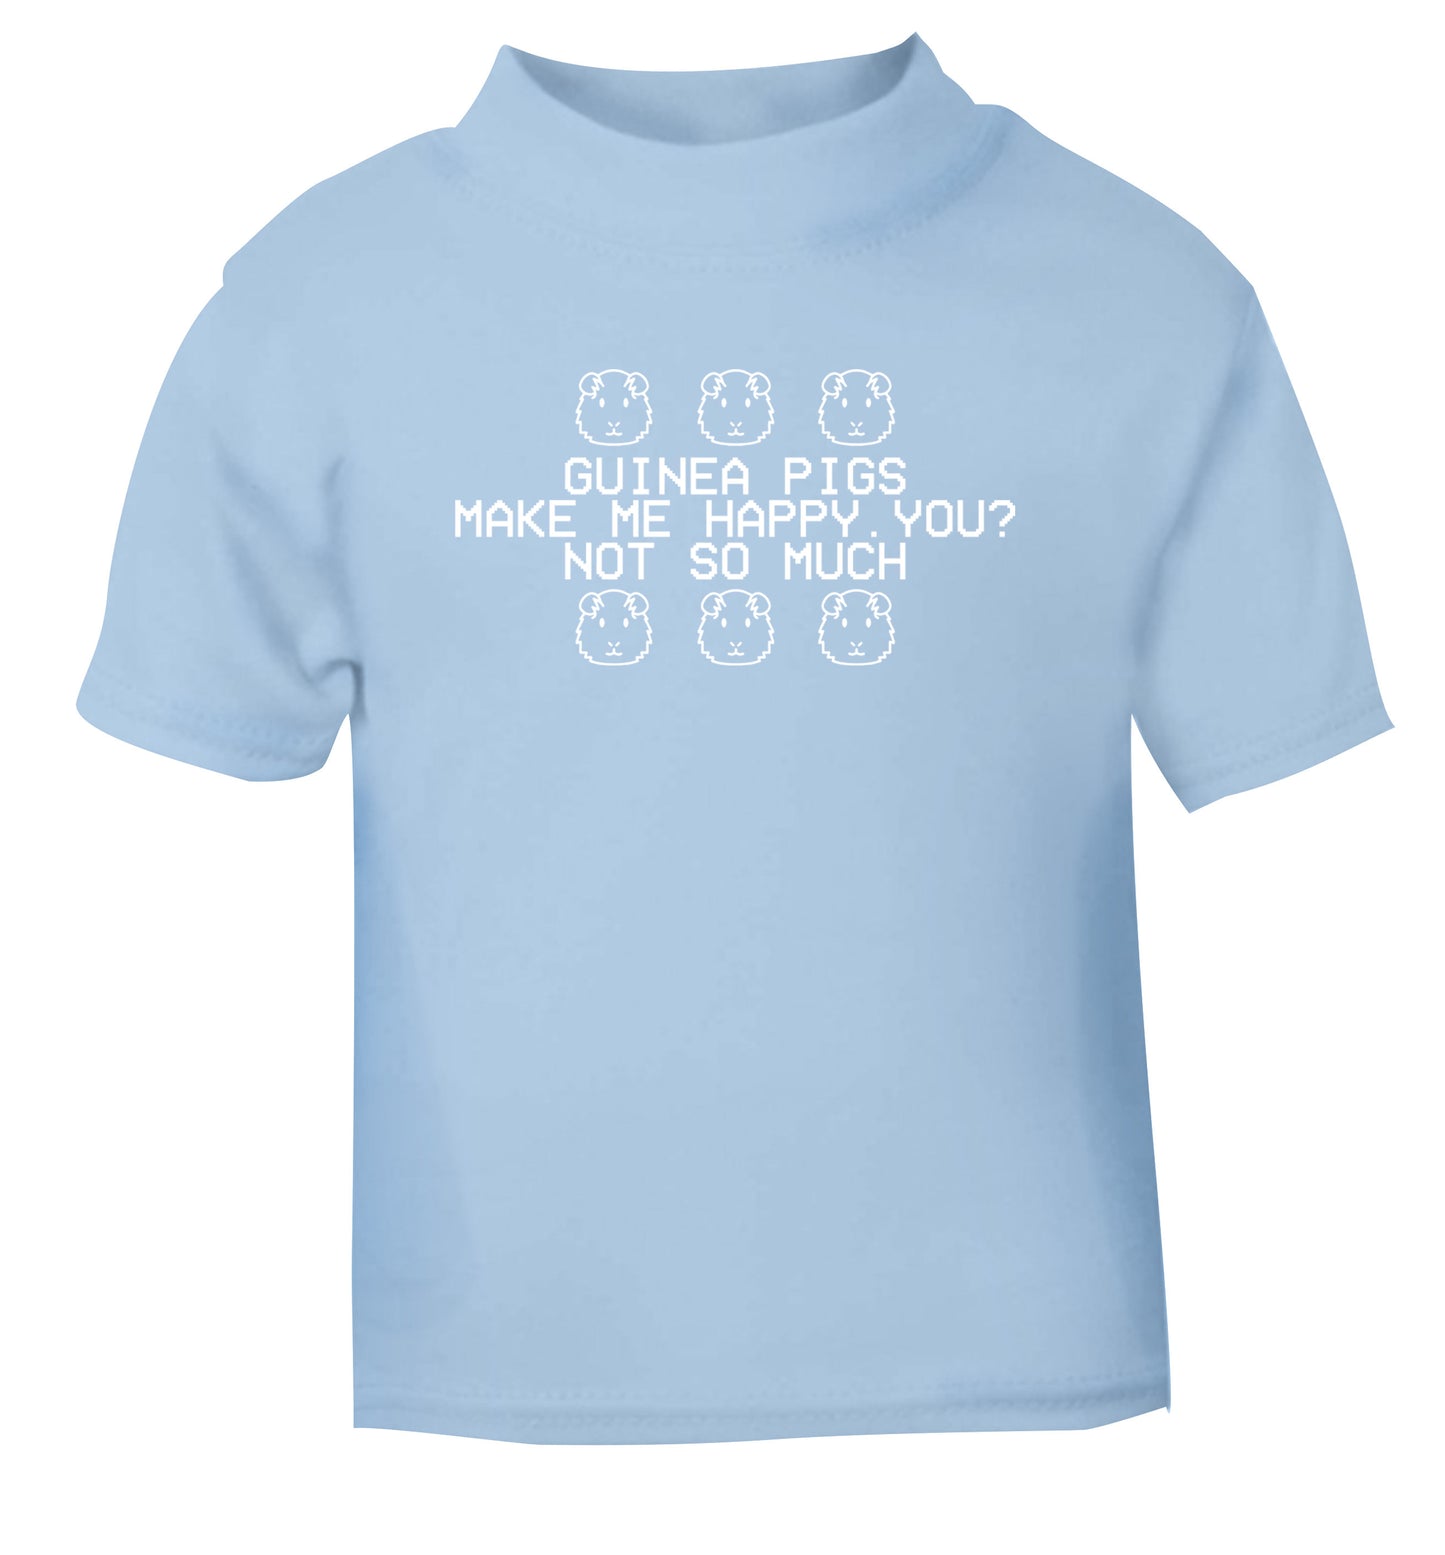 Guinea pigs make me happy, you not so much light blue Baby Toddler Tshirt 2 Years